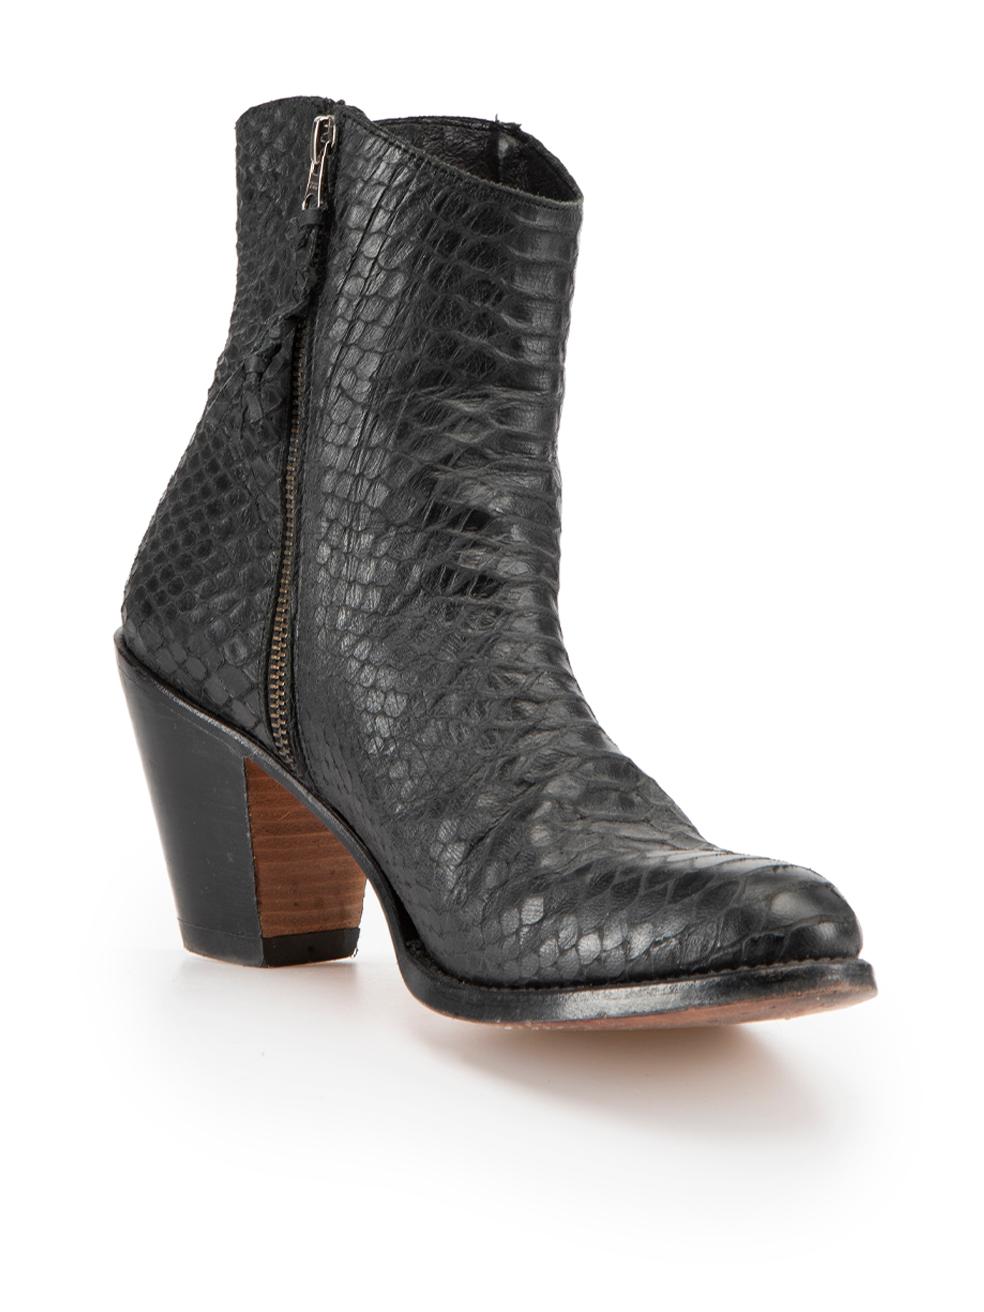 CONDITION is Very good. Minimal wear to boots is evident. Minimal wear to both heels with small scuff marks on this used Penelope Chilvers designer resale item.



Details


Black

Python leather

Ankle boots

Almond toe

High heeled

Cuban